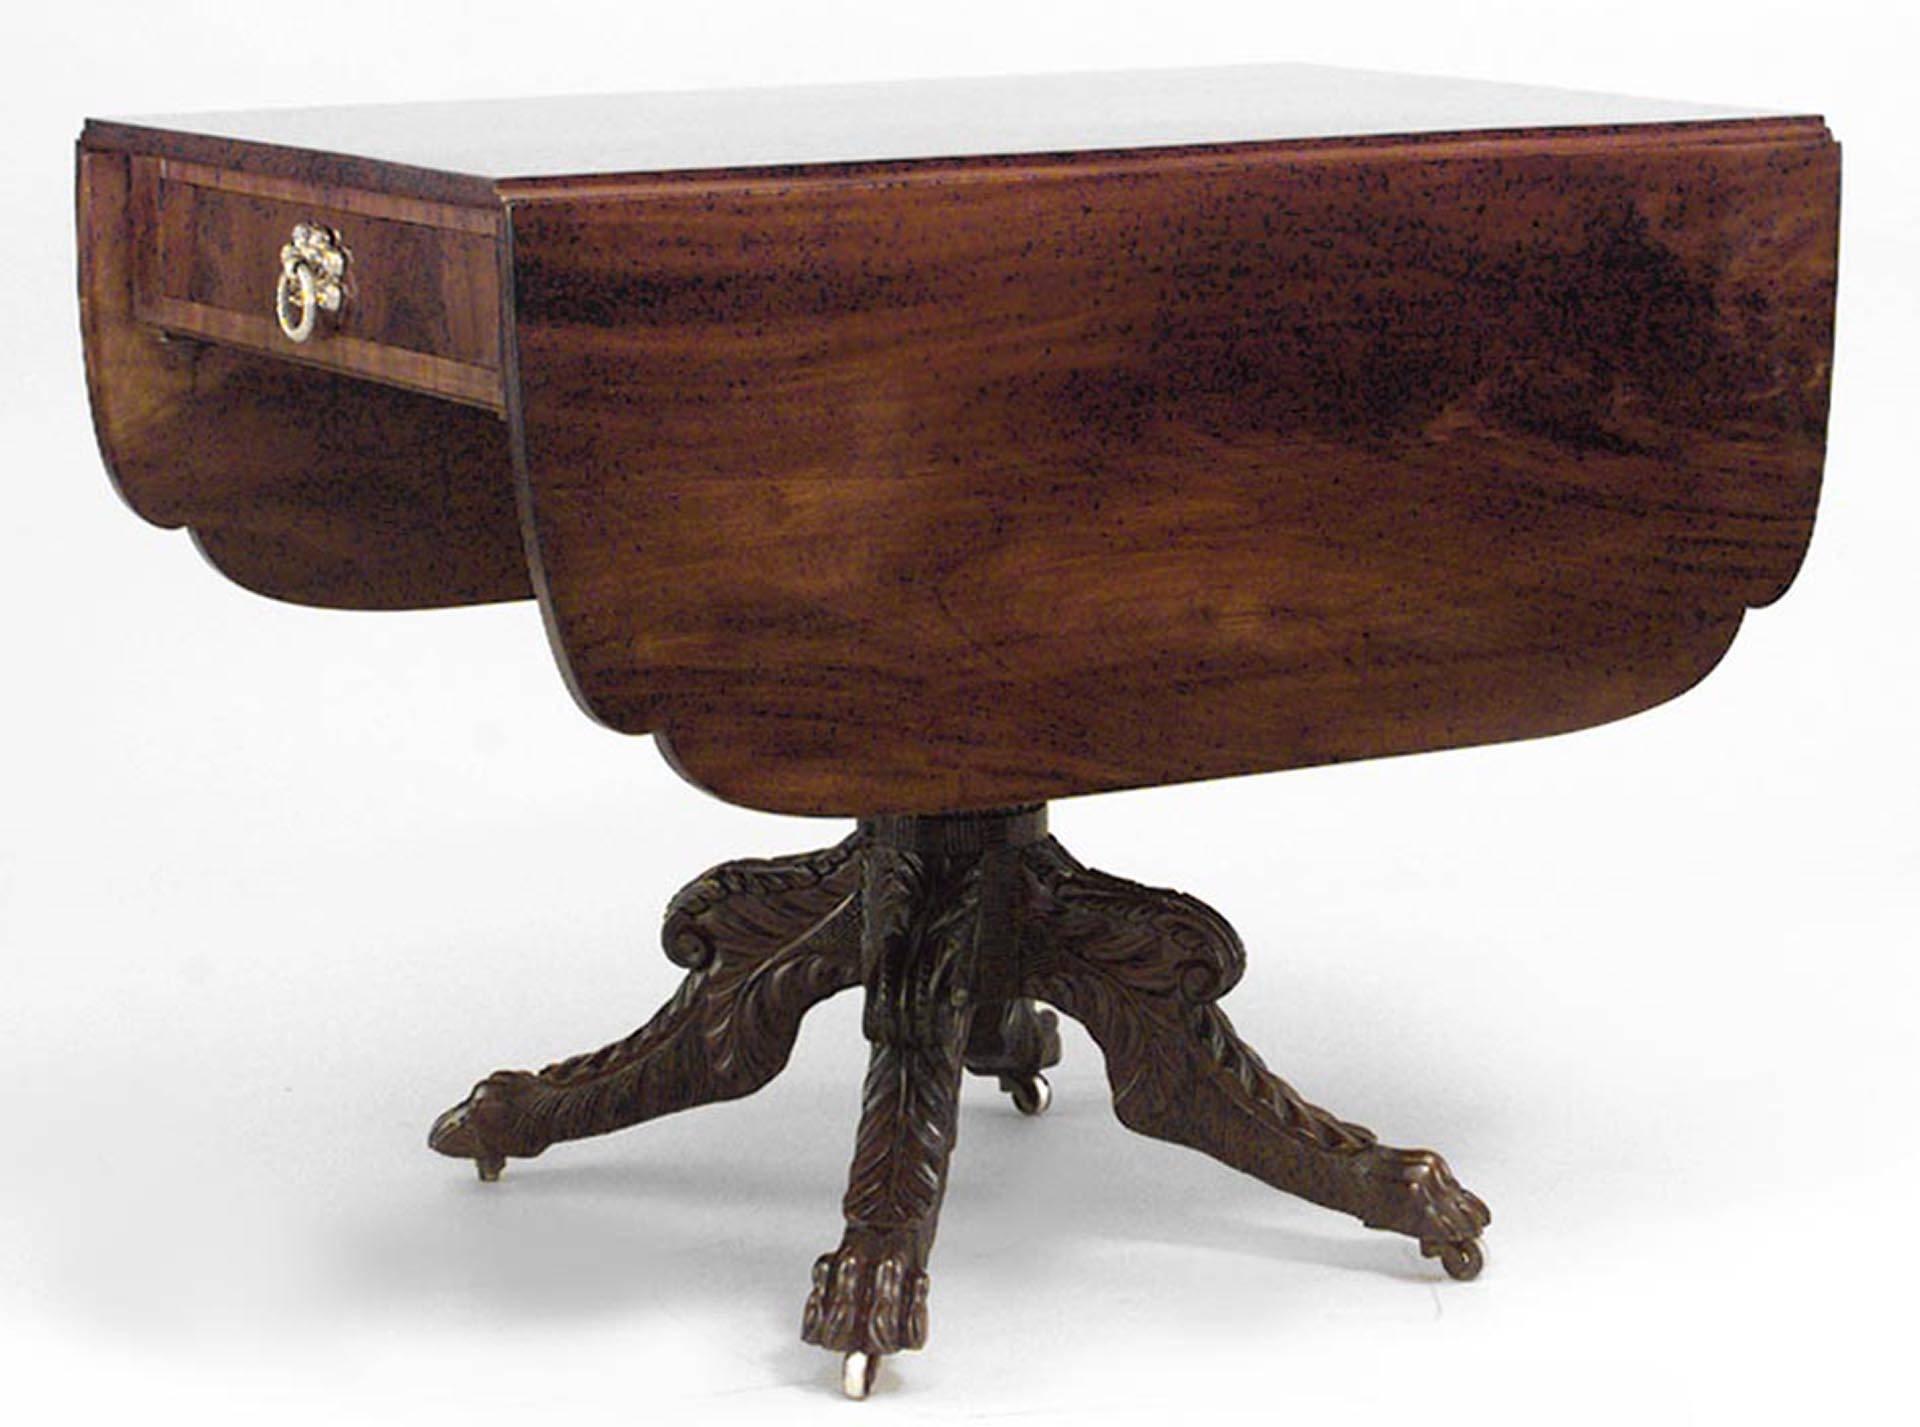 American Federal (Mid-19th Century) mahogany Pembroke table with re-entrant cornered top above a frieze drawer, an acanthus-carved stem & legs with lions paw feet & casters.
